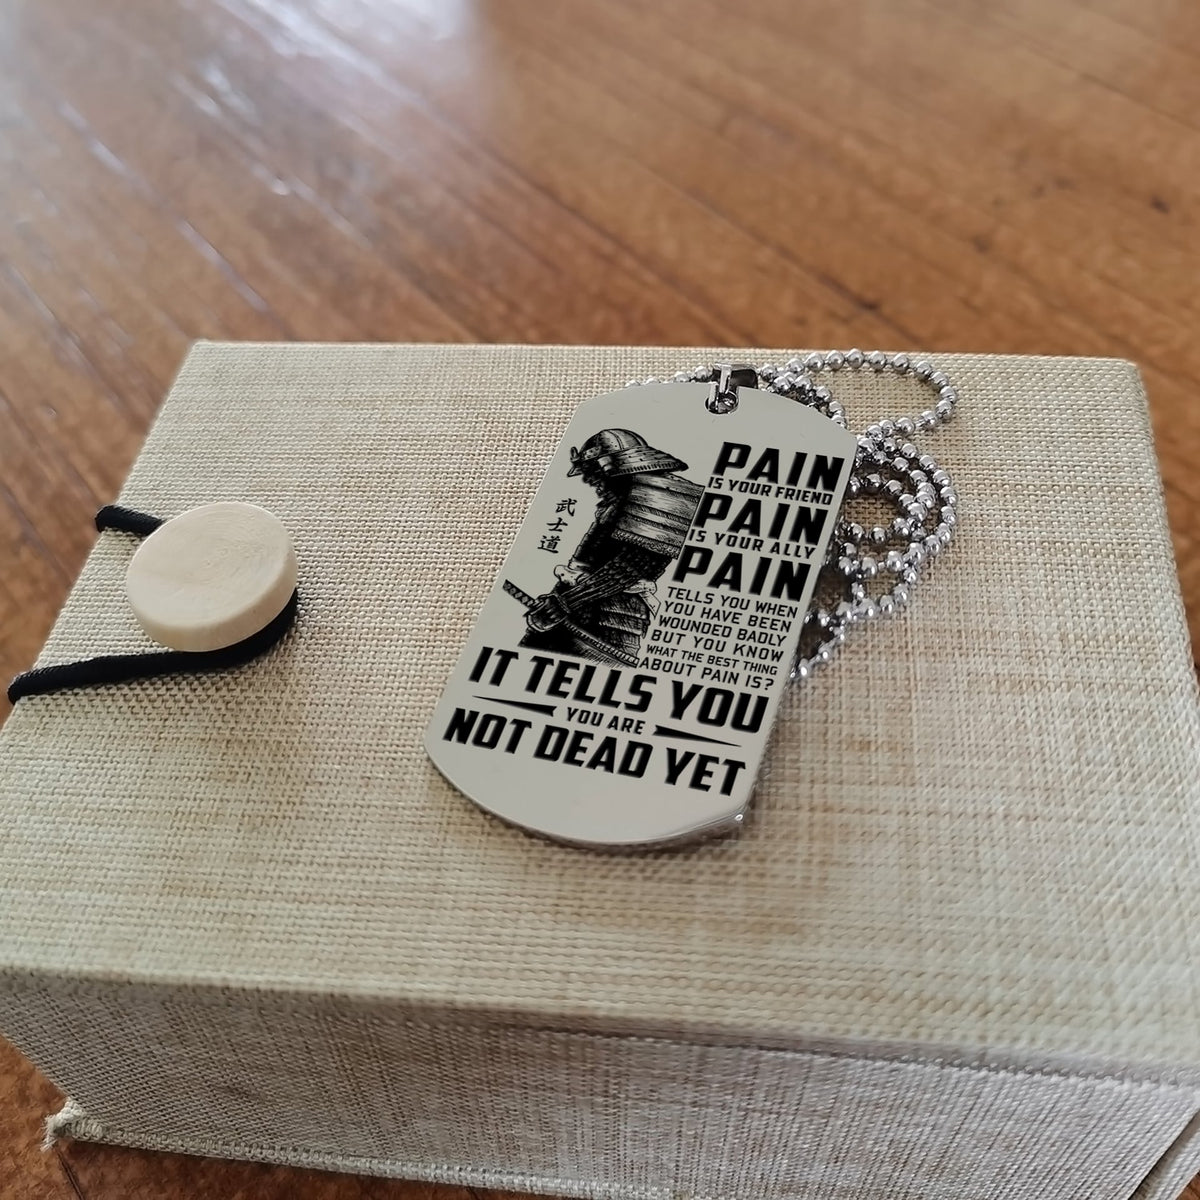 SAD014 - PAIN - You Are Not Dead Yet - Samurai - Engrave Silver Dog Tag